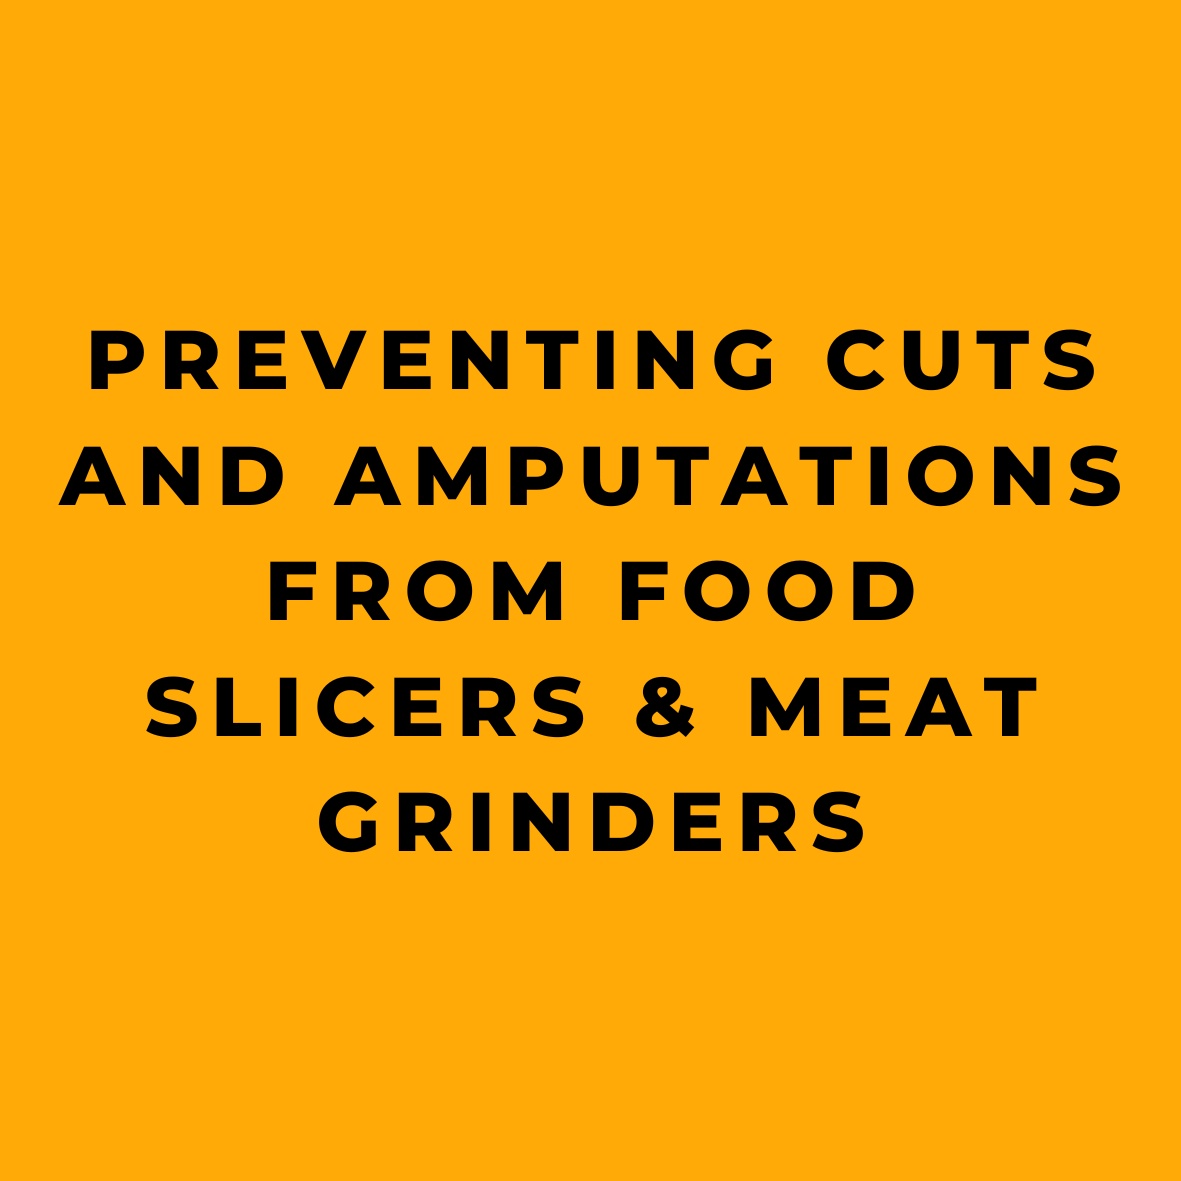 Preventing Cuts and Amputations from Food Slicers & Meat Grinders